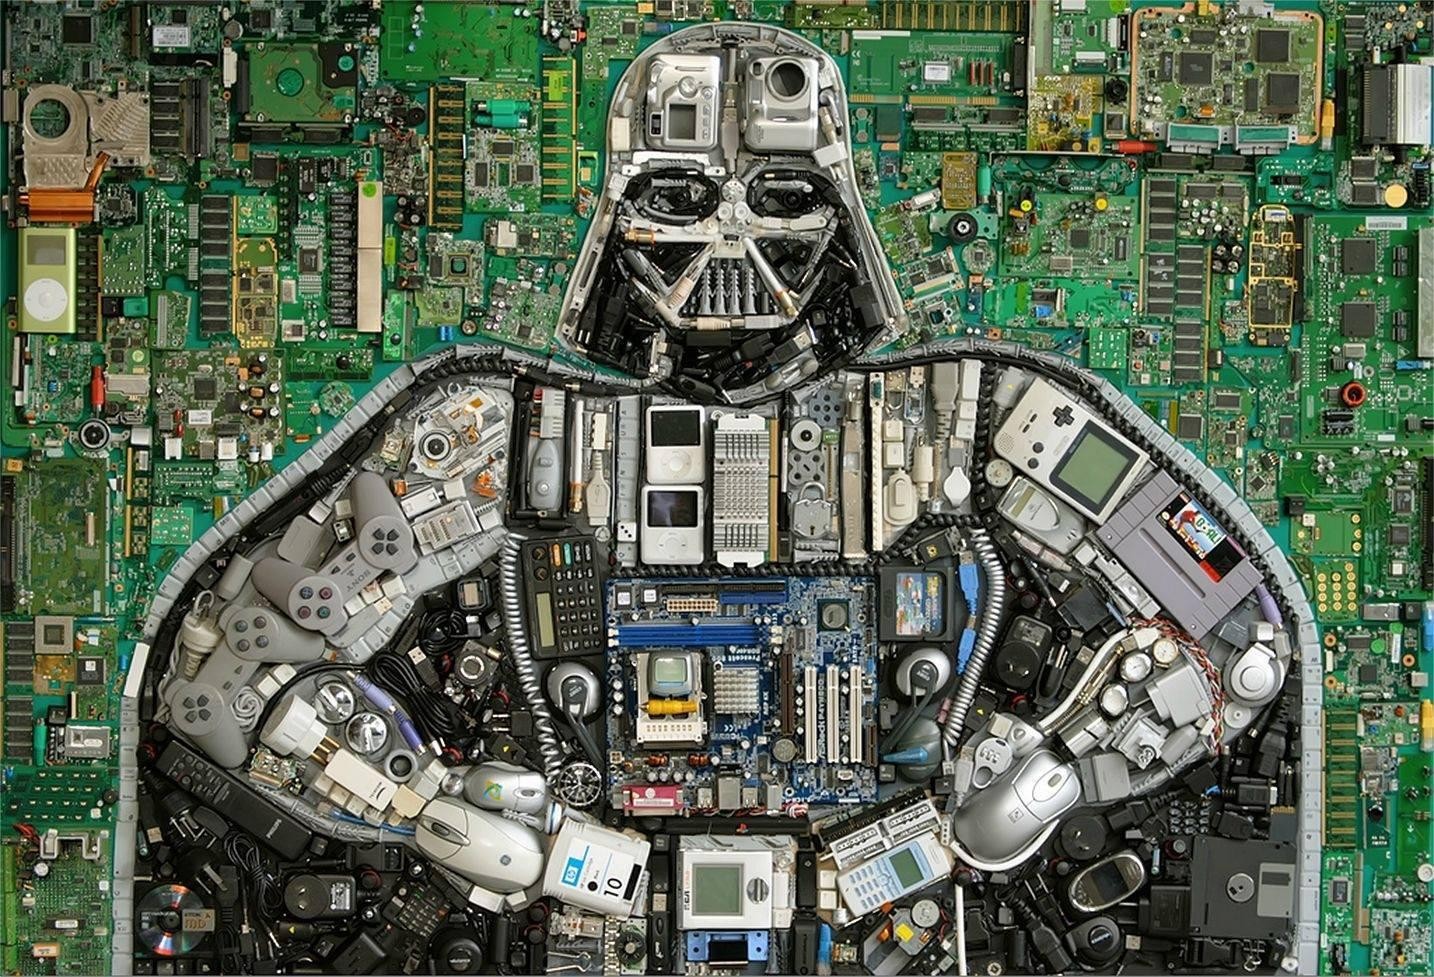 Star Wars Motherboards Darth Vader Circuit Boards Hardware Nintendo Controllers Ipod Computer Mice F 1434x977